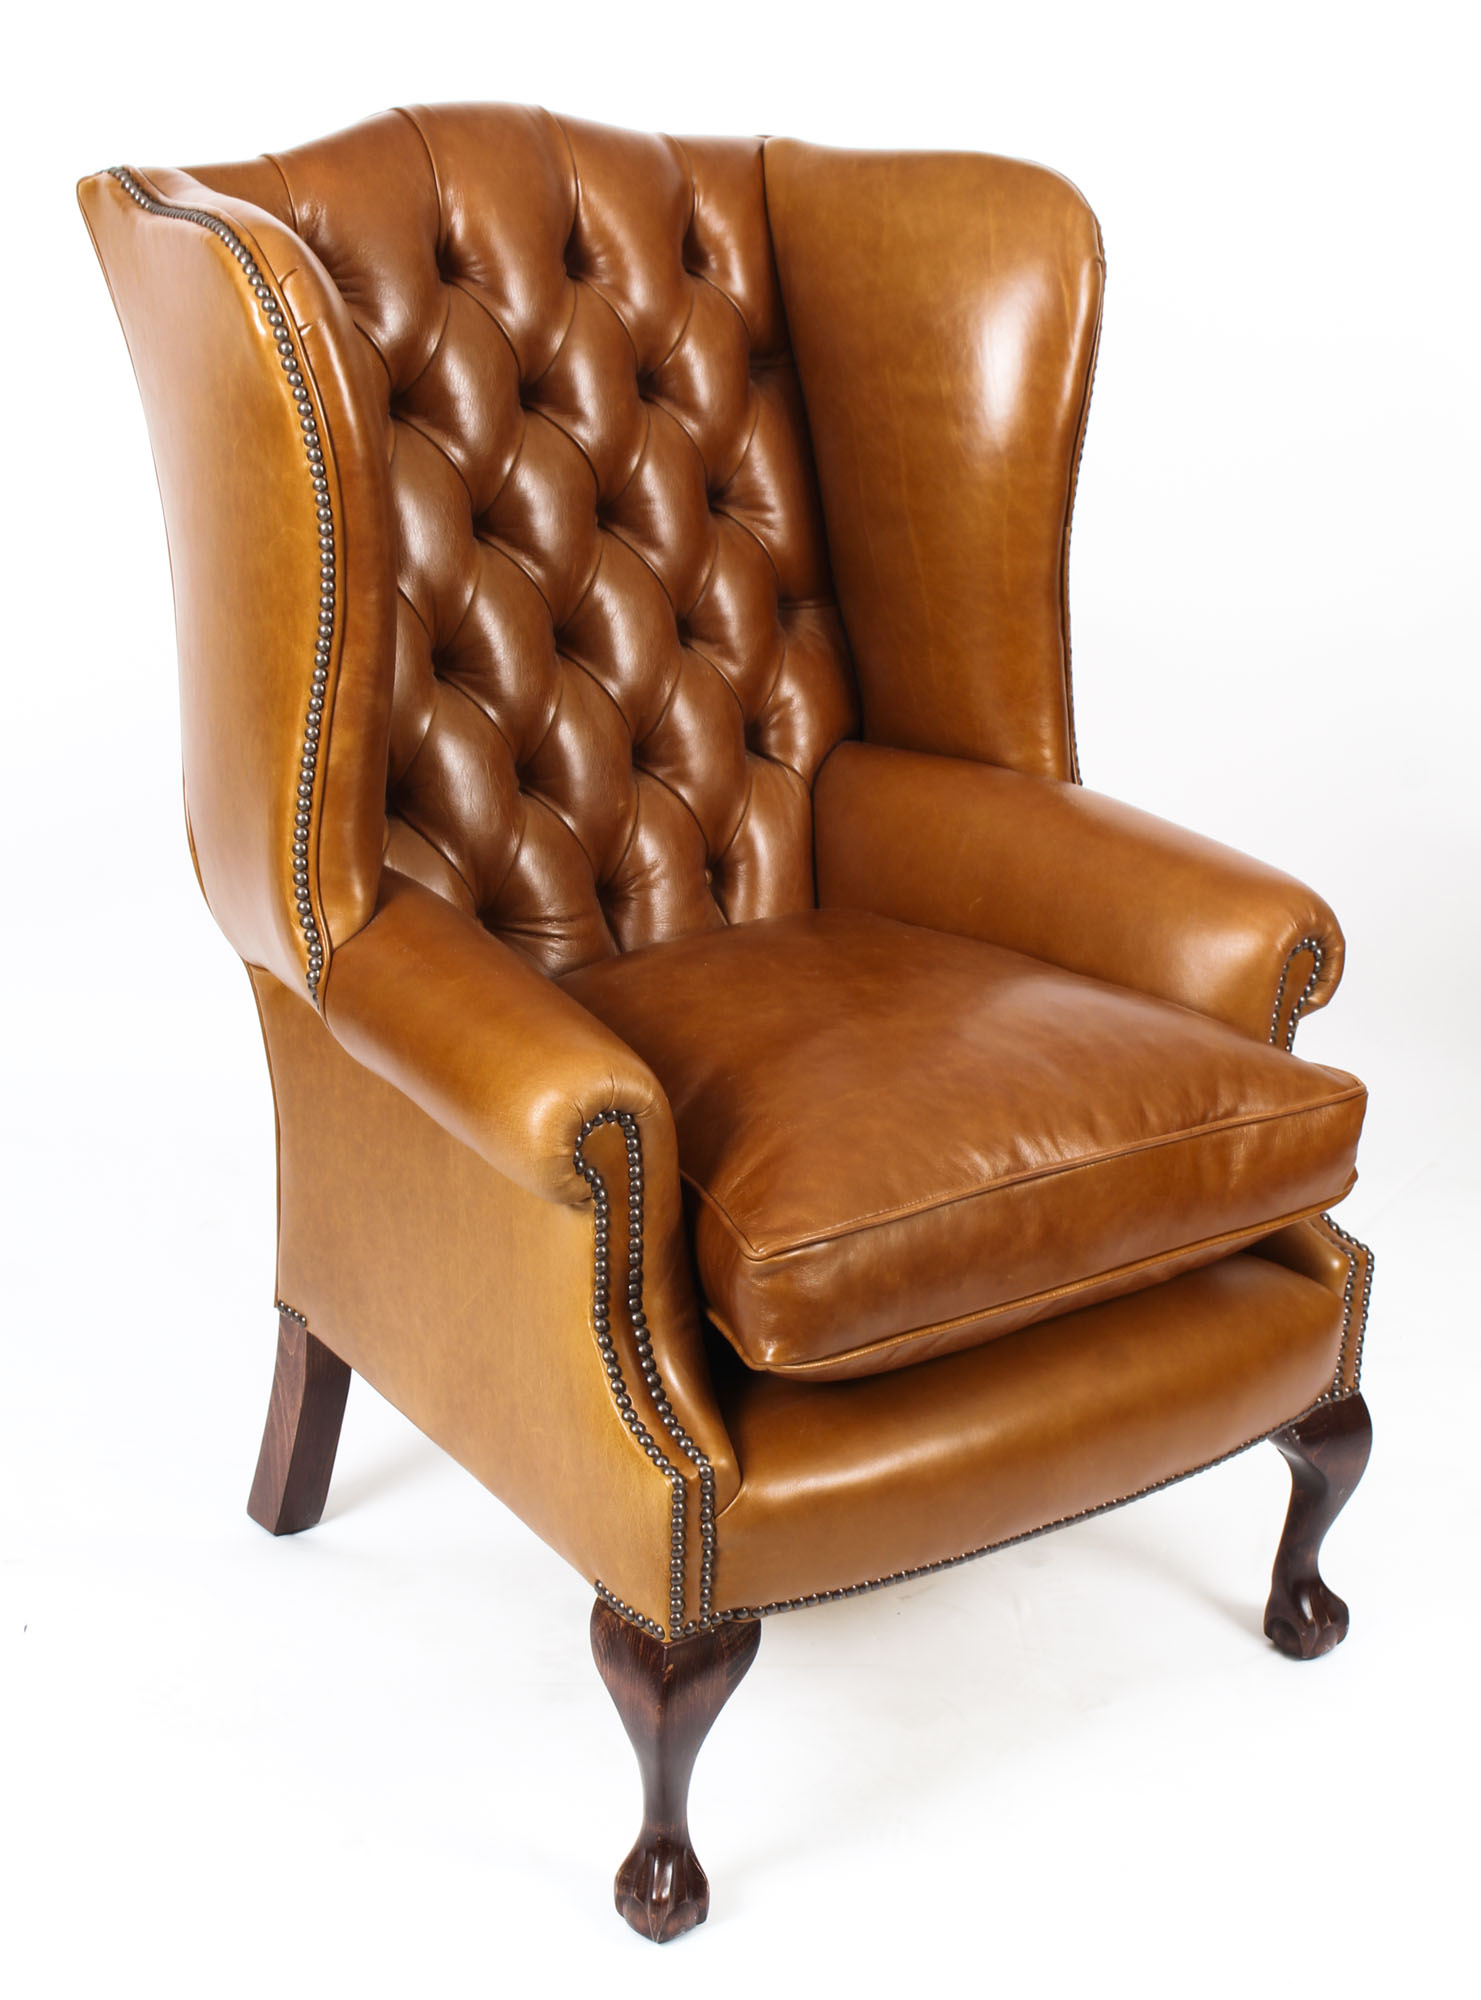 Bespoke Leather Ref No 06566f, Wingback Chairs Leather